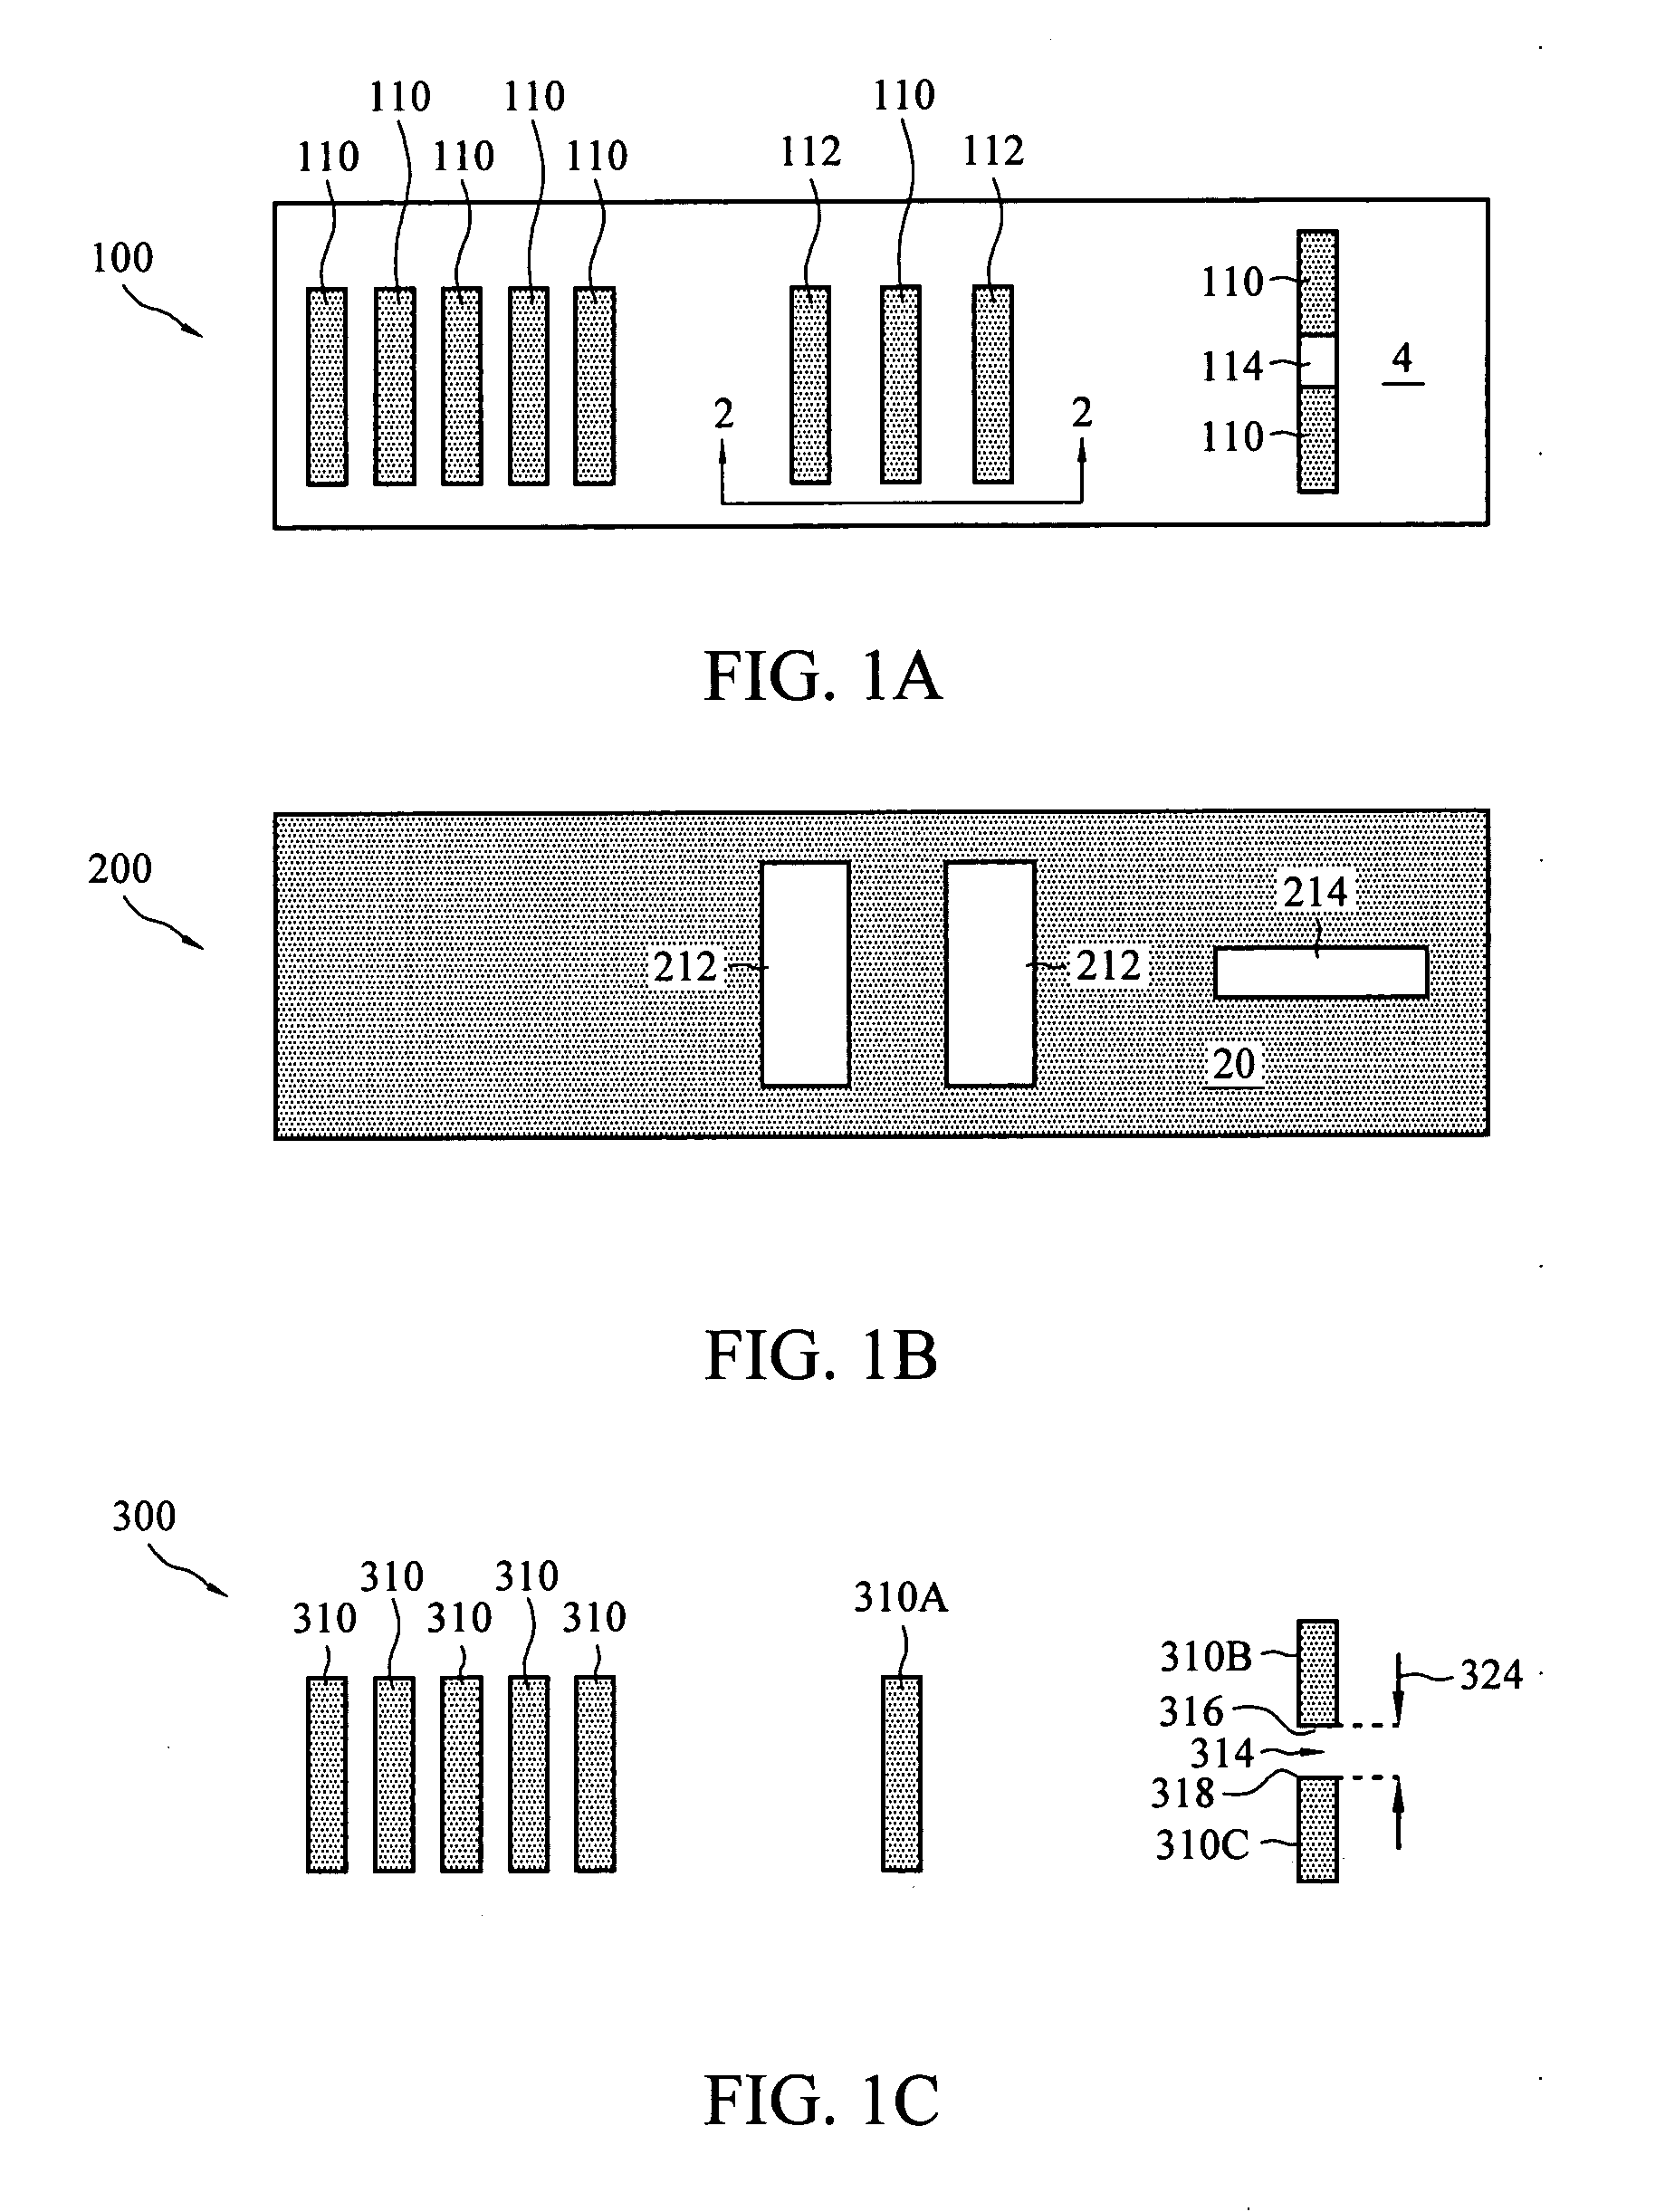 Utilizing compensation features in photolithography for semiconductor device fabrication